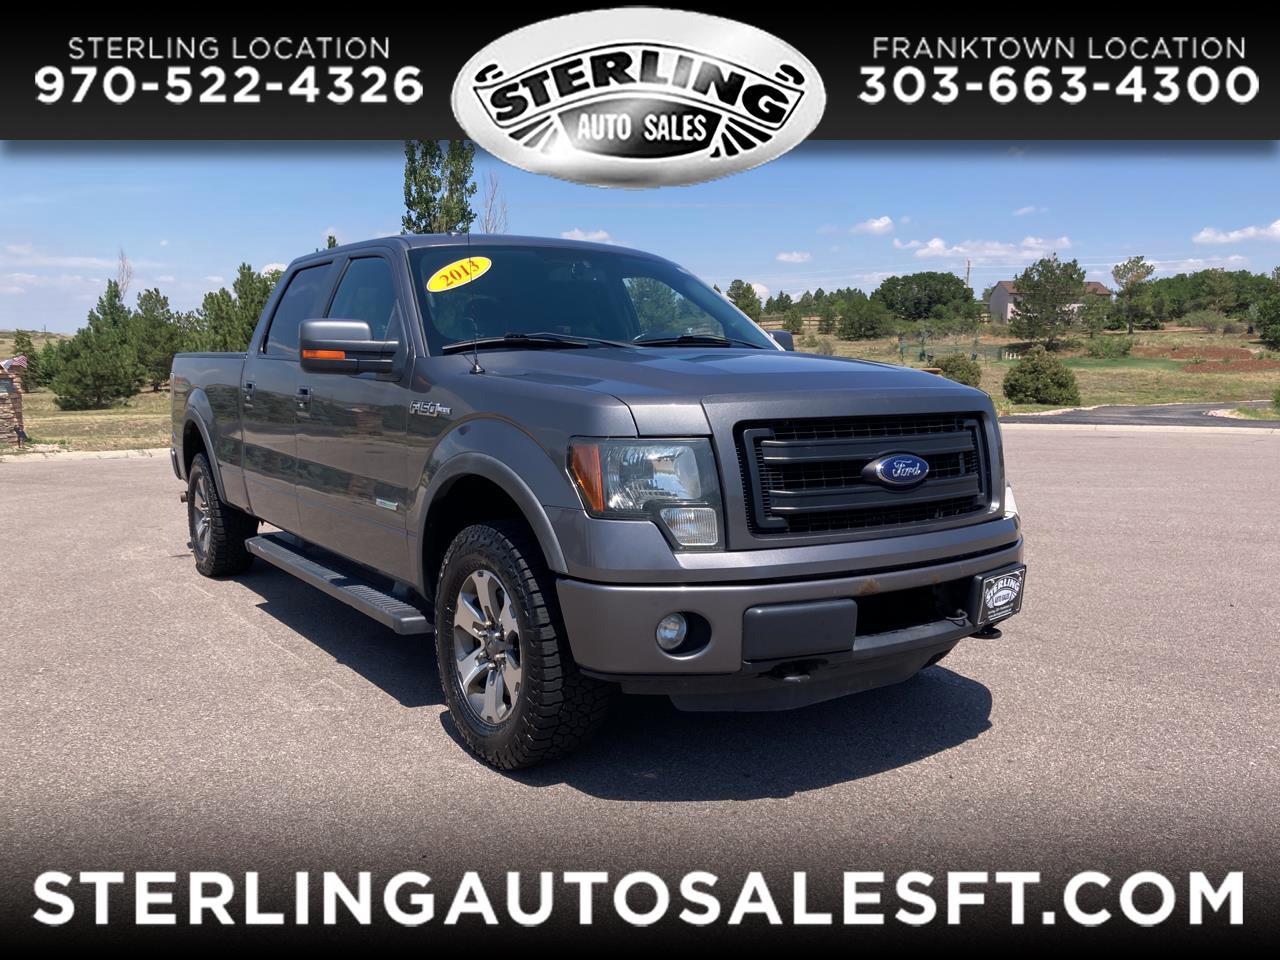 Ford F-150 4WD SuperCrew 139" FX4 2013